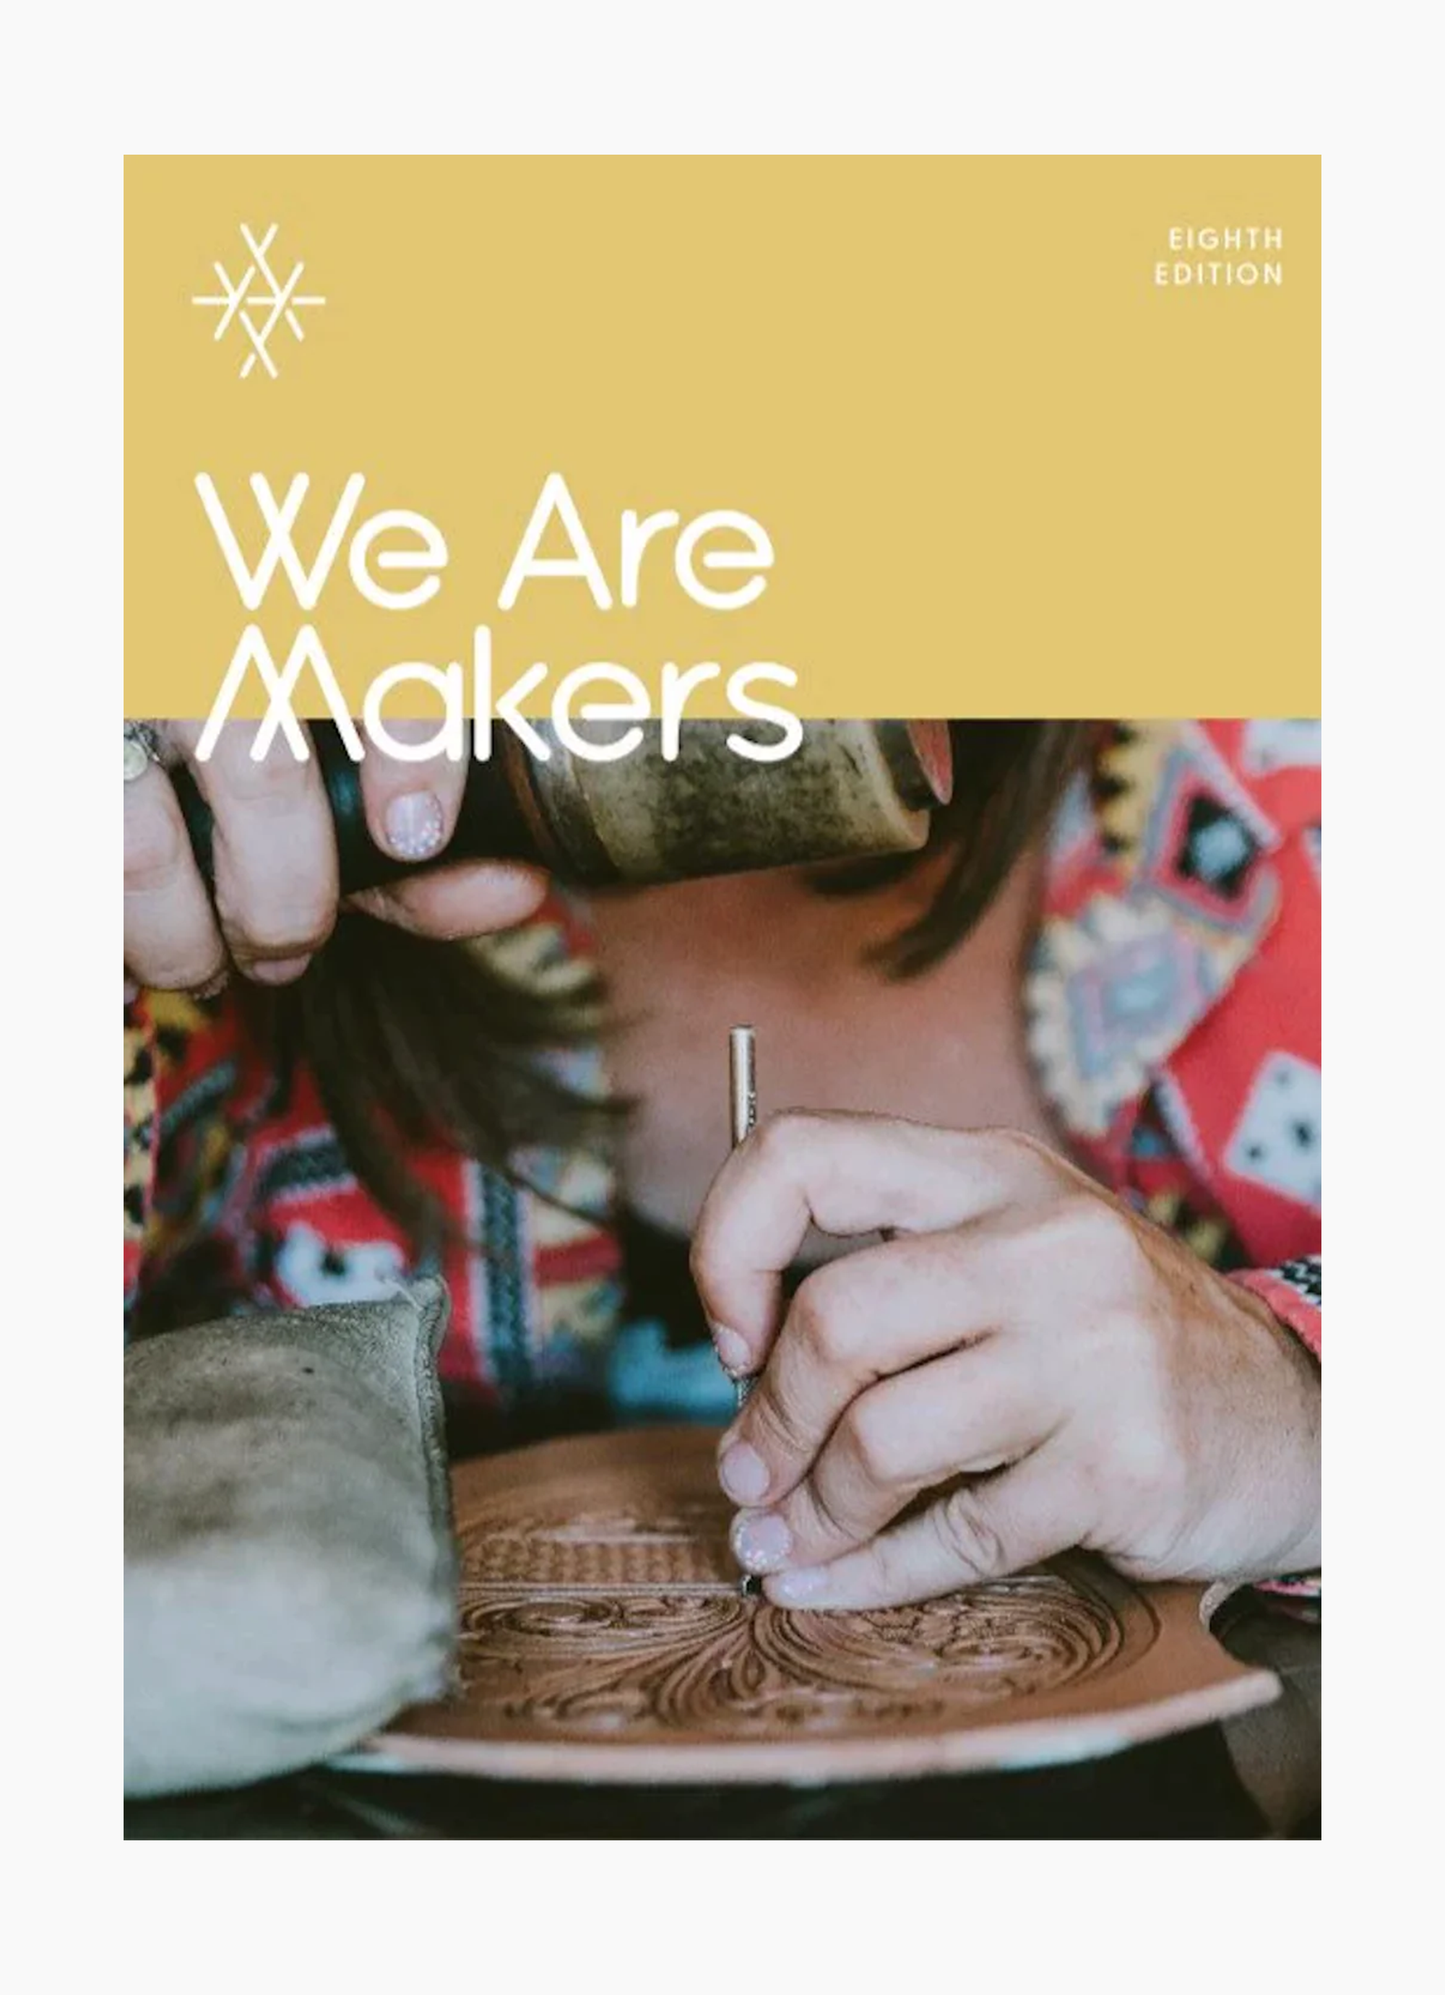 We Are Makers, Issue 8